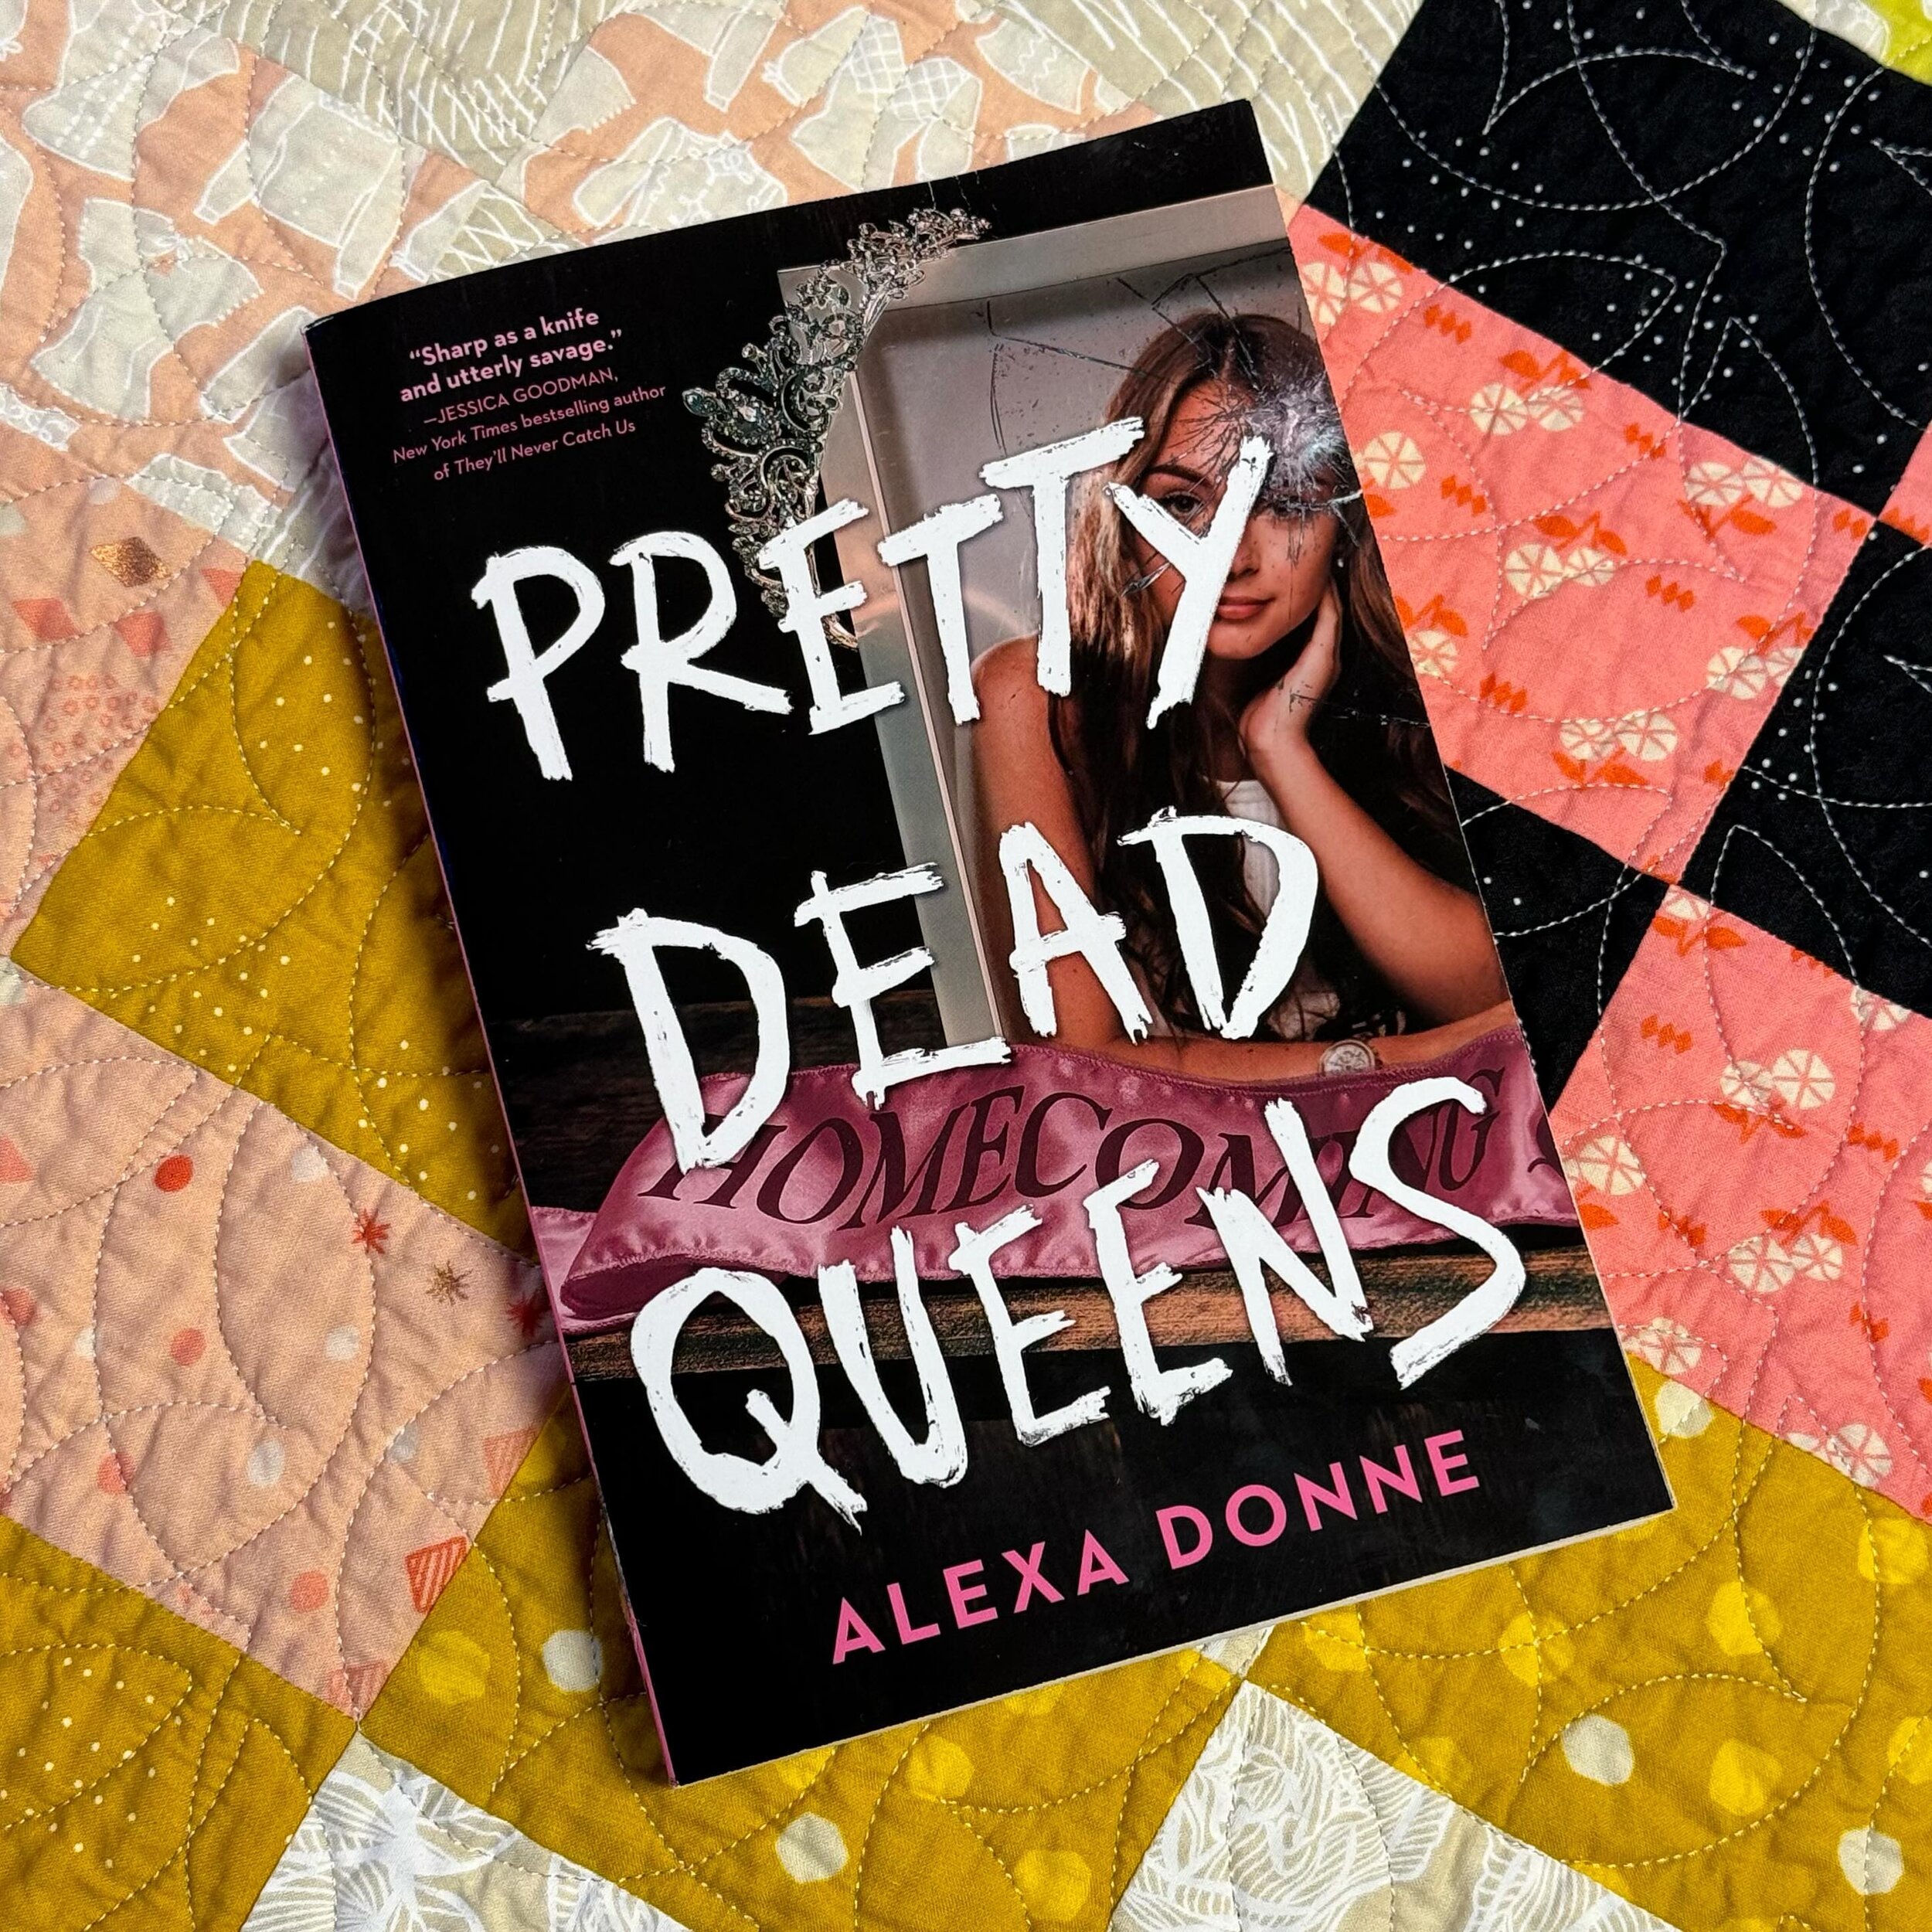 A fresh paperback is a wonderful thing! PRETTY DEAD QUEENS, Alexa Donne&rsquo;s Edgar Award nominated YA thriller, is now available in paperback. If you like a little MURDER, SHE WROTE in your thrillers, don&rsquo;t skip this one. 

&mdash;

The new 